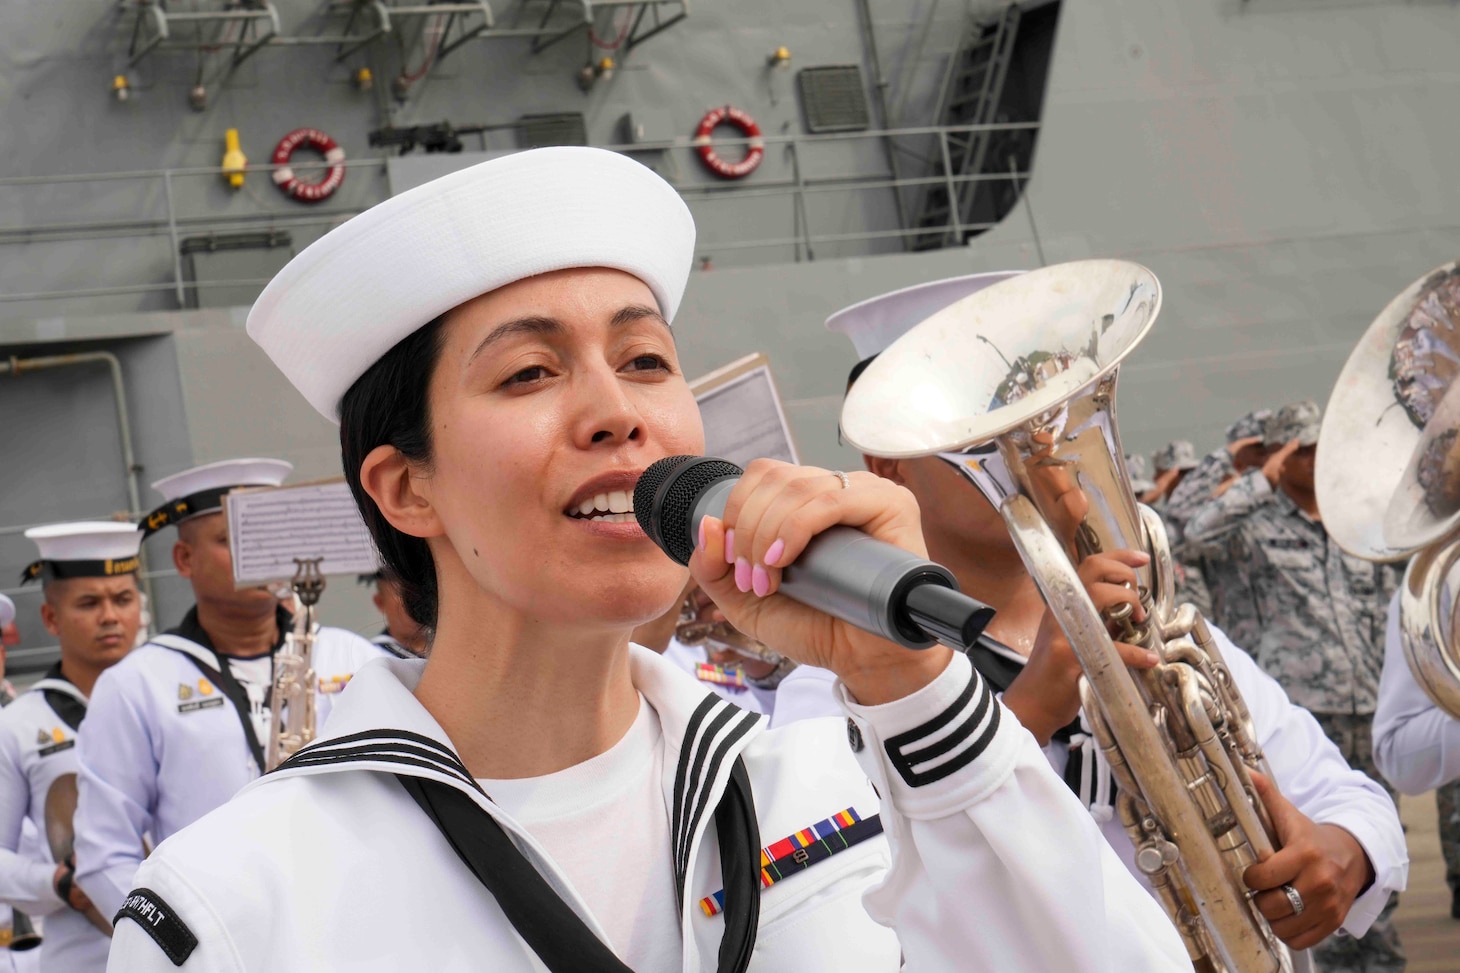 Musician 3rd Class Marisol Arreola sings the U.S. national anthem during the opening ceremony of Cooperation Afloat Readiness and Training (CARAT)/Marine Exercise (MAREX) Thailand 2023 at Royal Thai Fleet Headquarters, May 8. CARAT/MAREX Thailand is a bilateral exercise between the Kingdom of Thailand and United States to promote regional security cooperation, practice humanitarian assistance and disaster relief, and strengthen maritime understanding, partnerships and interoperability. Thailand has been part of the CARAT exercise series since 1995. In its 29th year, the CARAT series is comprised of multinational exercises, designed to enhance U.S. and partner forces’ abilities to operate together in response to traditional and non-traditional maritime security challenges in the Indo-Pacific region.